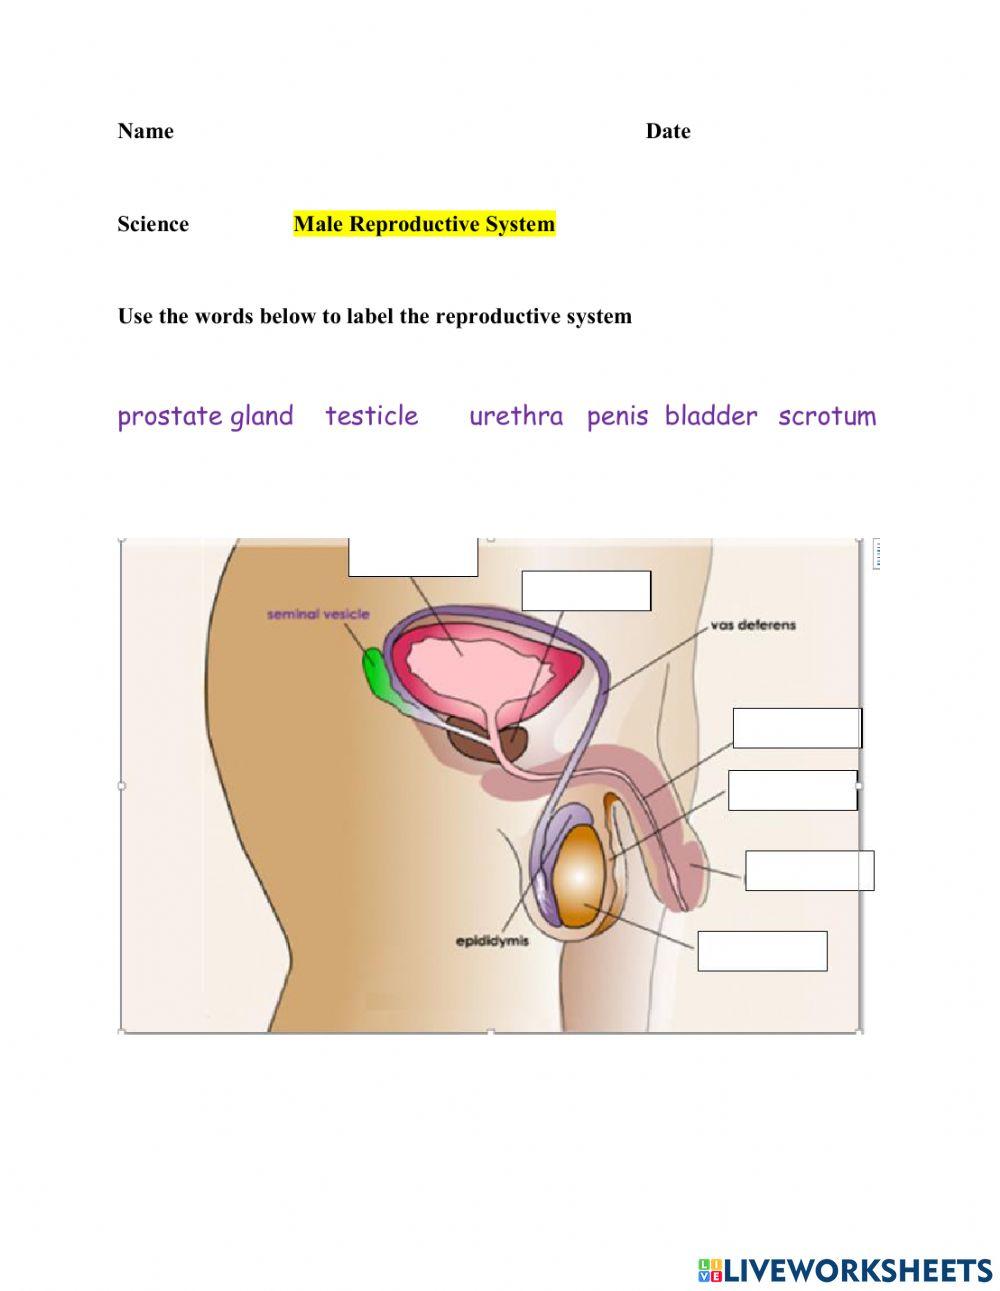 Science- Male Reproductive System